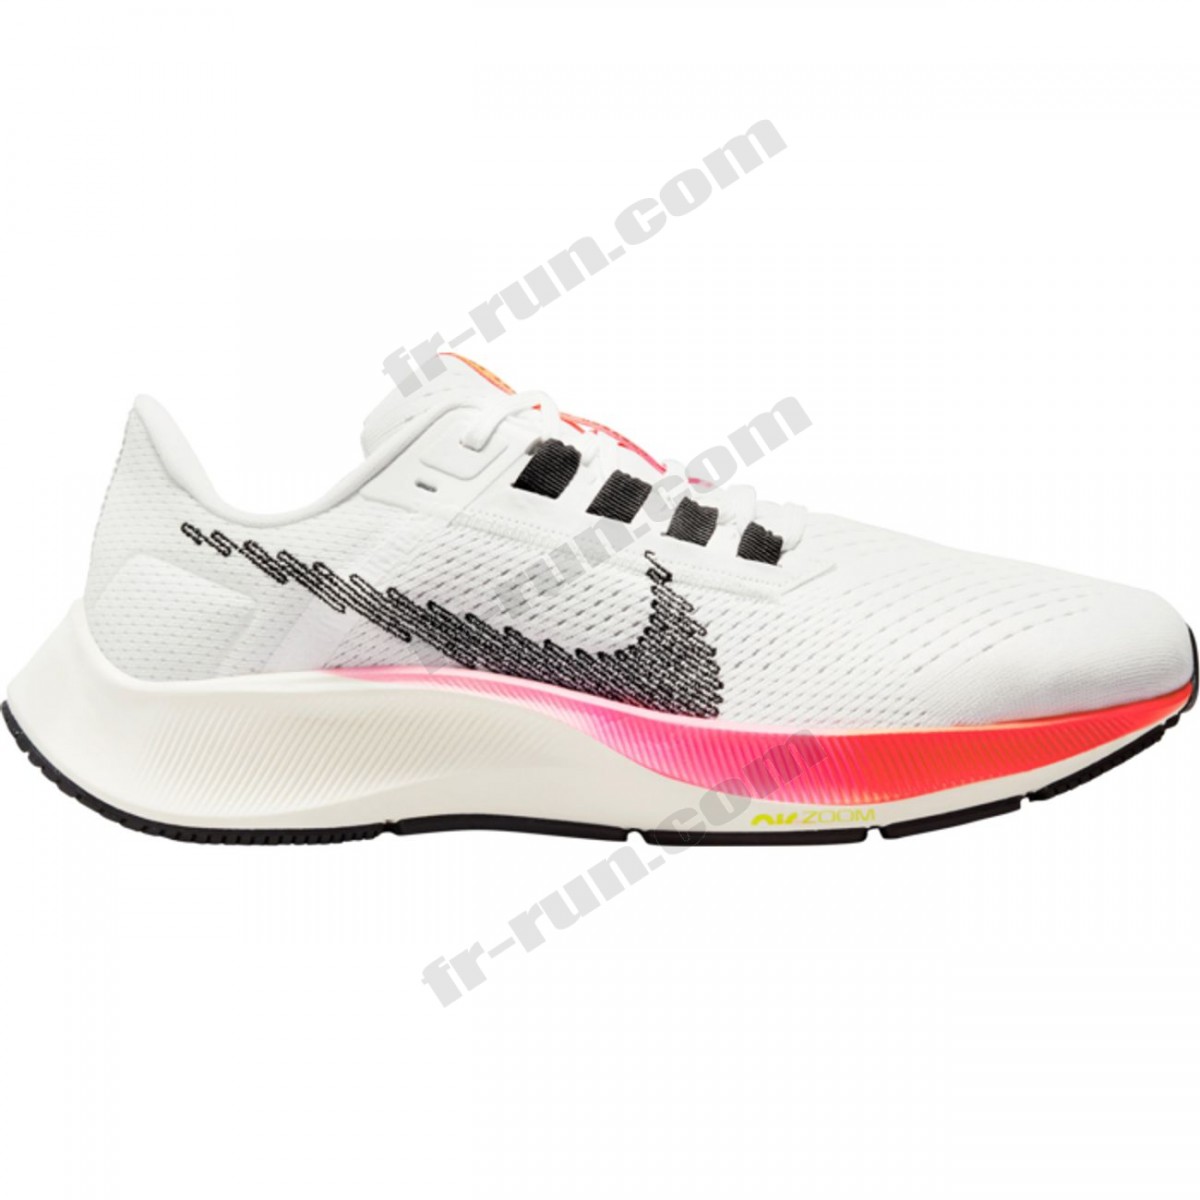 Nike/CHAUSSURES BASSES running femme NIKE W NIKE AIR ZOOM PEGASUS 38 T √ Nouveau style √ Soldes - -0